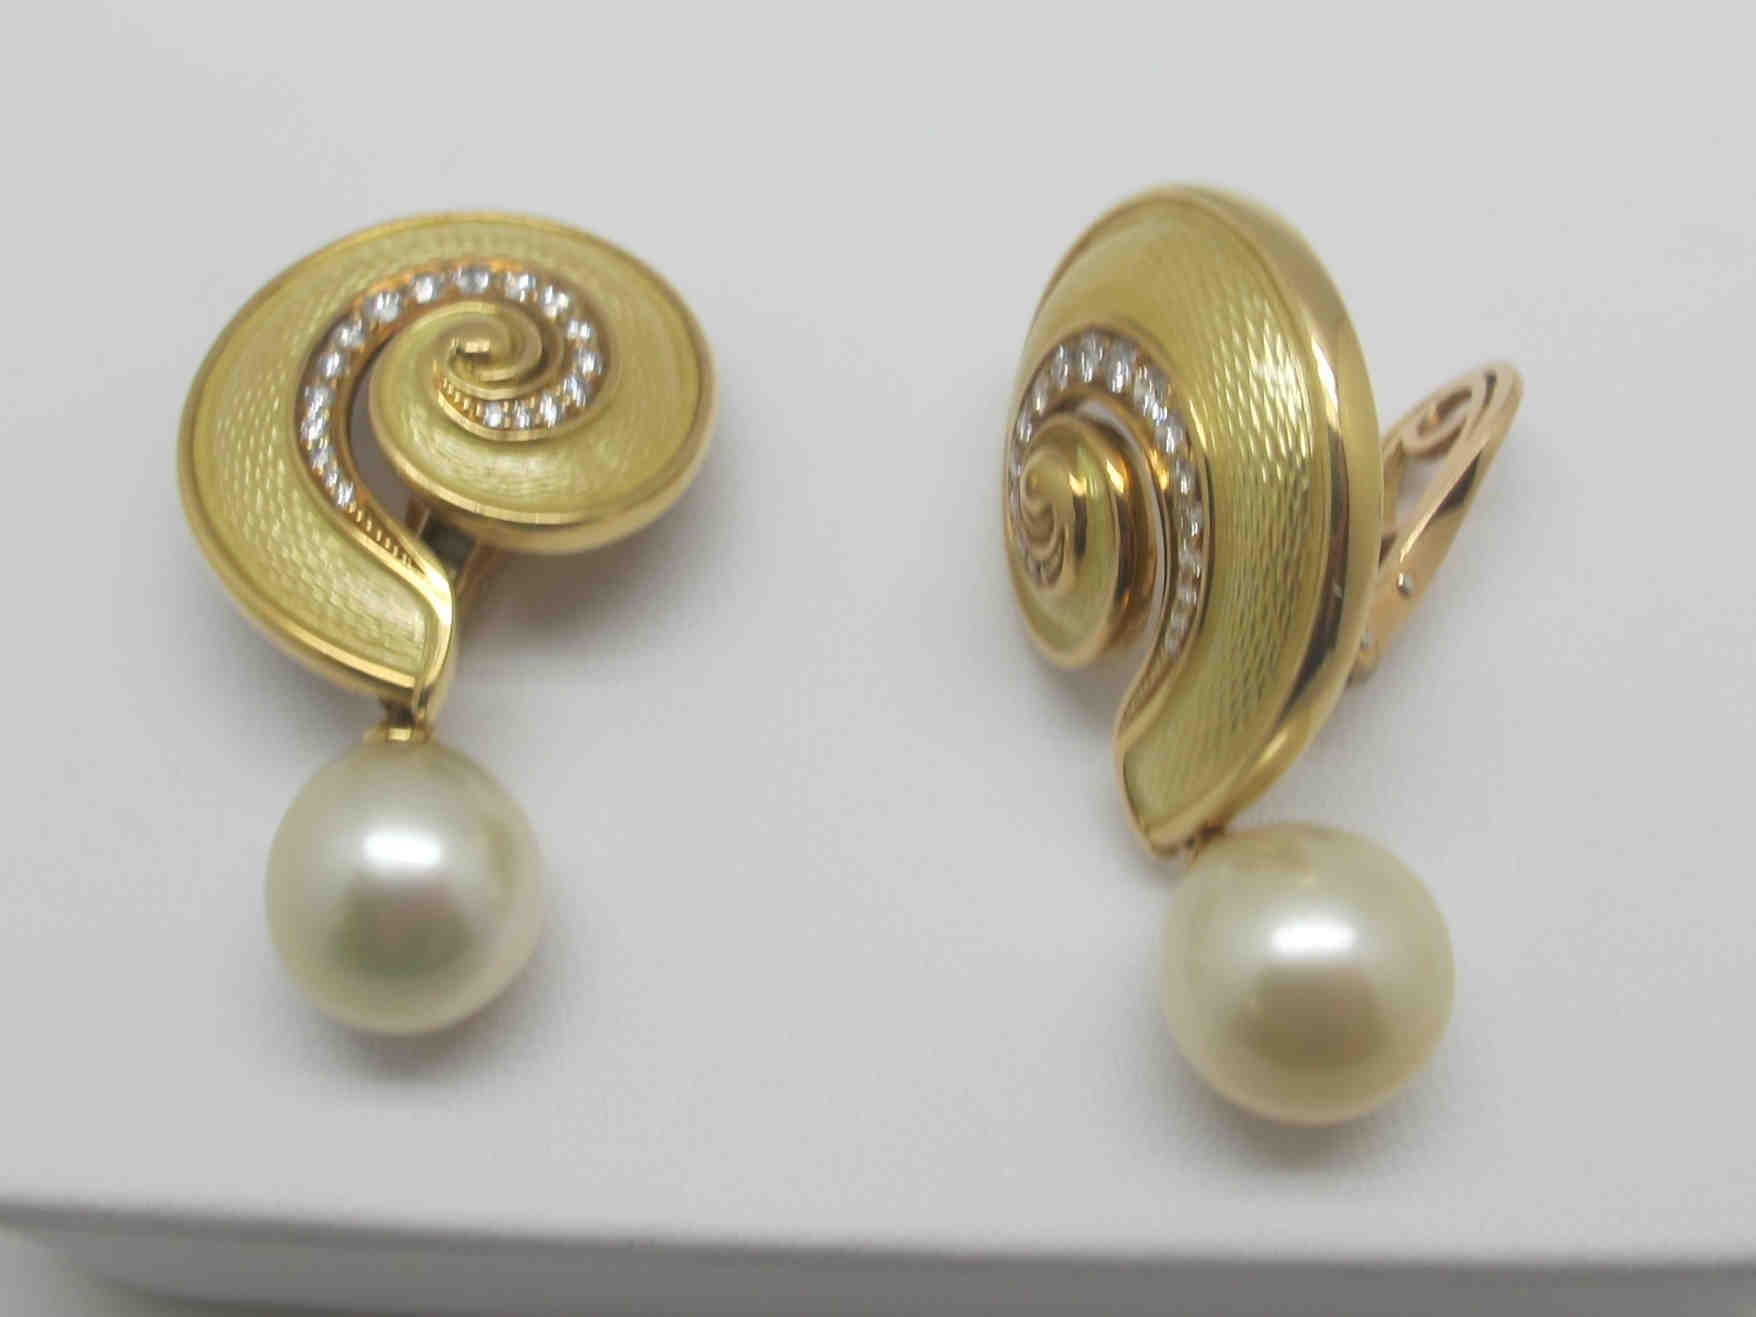 These beautiful Leo de Vroomen enamel and 18k yellow gold earrings set with diamonds and detachable pearls are the definition of timeless class. With their unique shape and gorgeous craftsmanship, they are truly wearable works of art. Fine quality